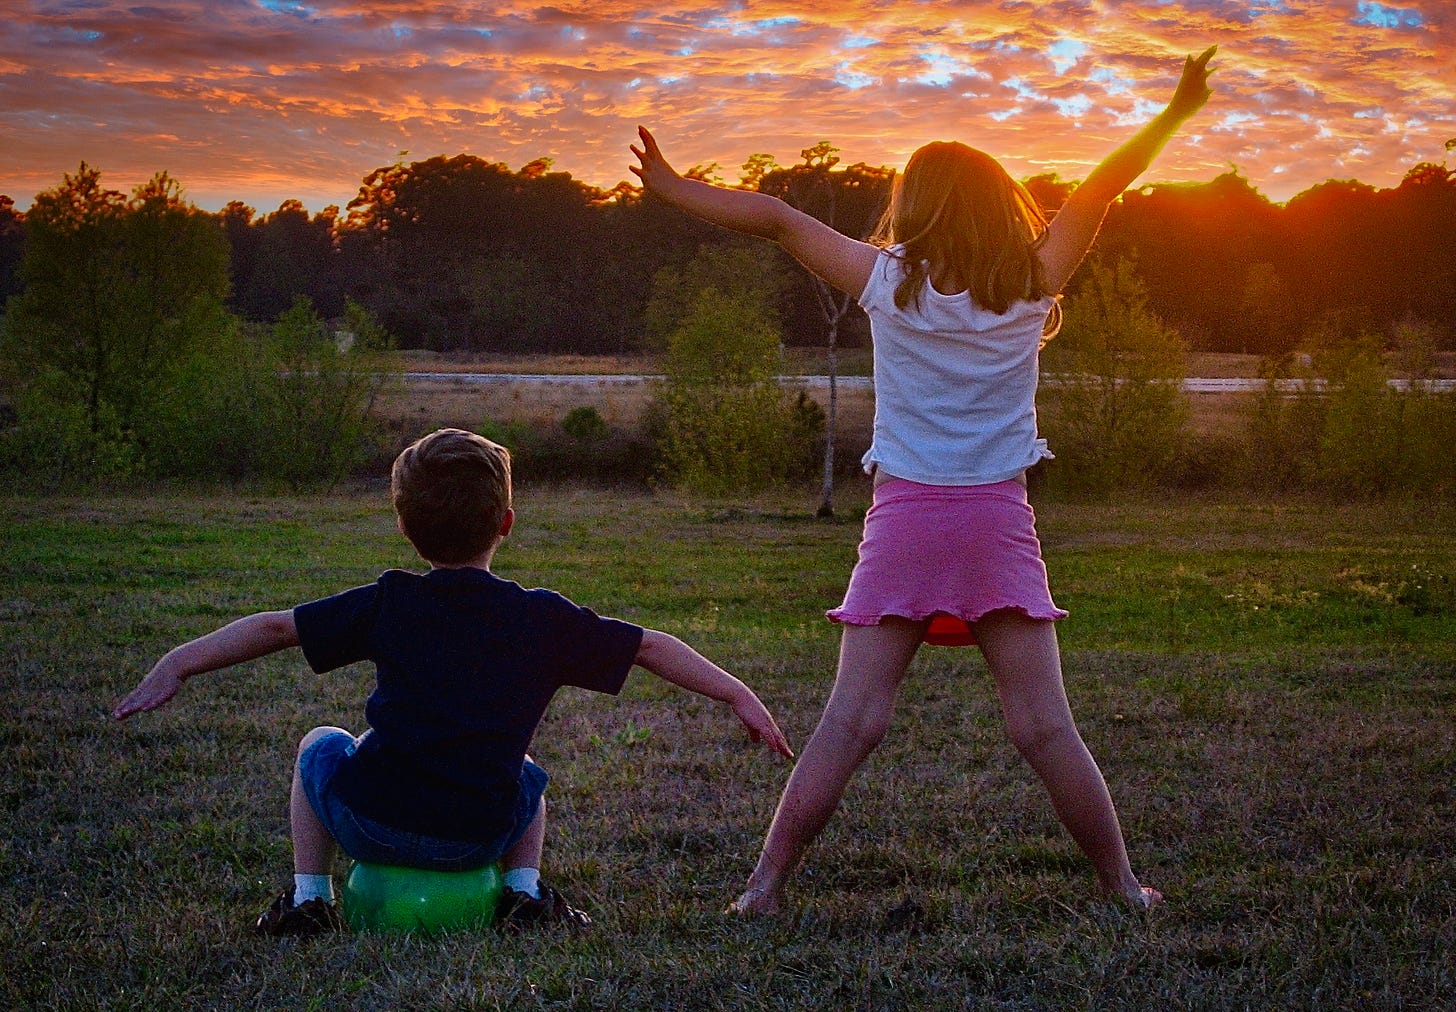 two children facing a colorful sunset on the lake, a boy sitting on a green ball arms outstretched and the girl in a white shirt and pink skirt standing with feet and arms stretched out